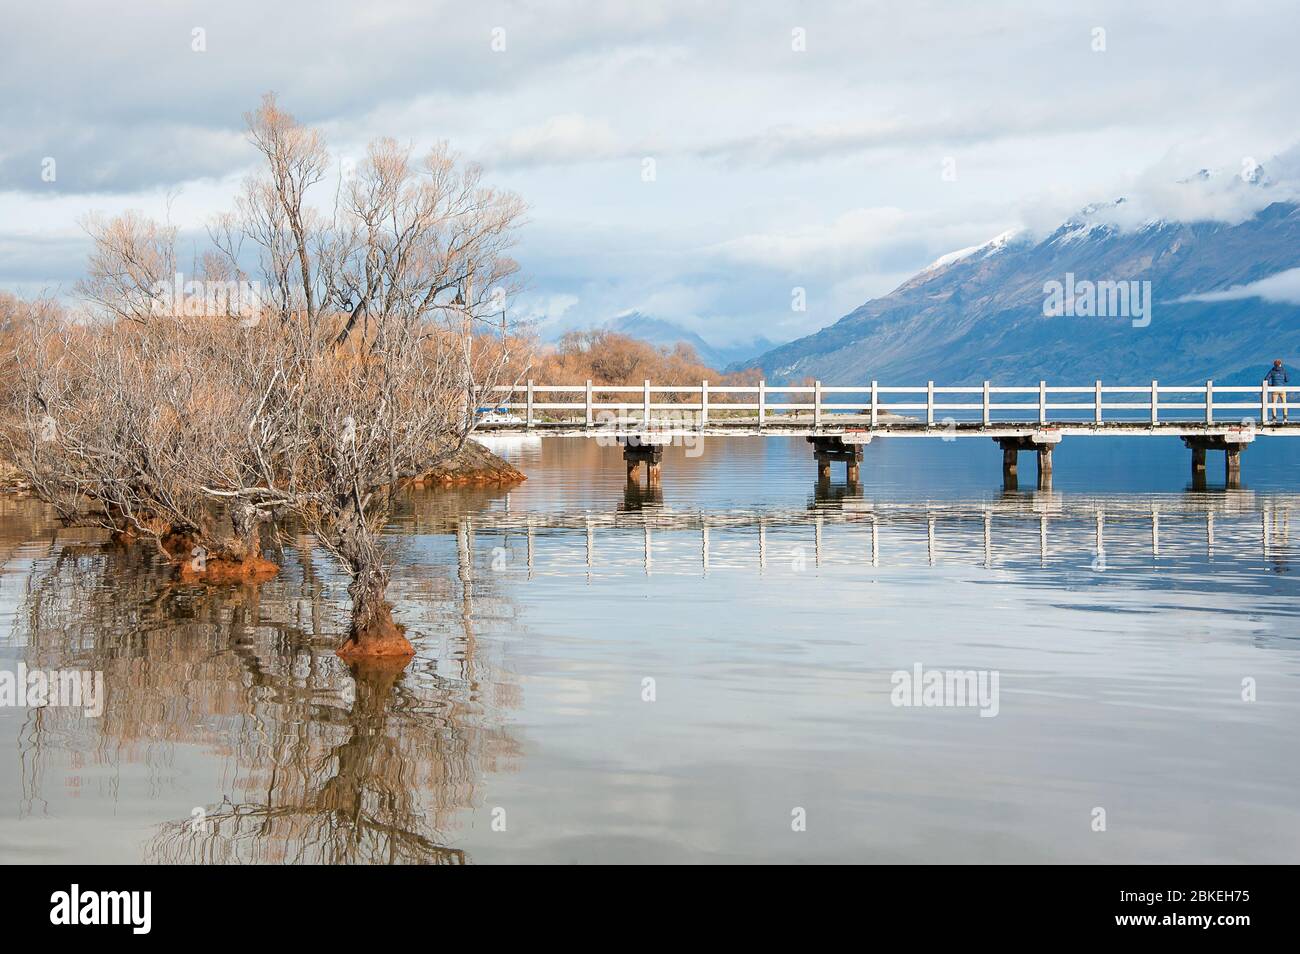 The Willows of Lake Wakatipu, Glenorchy, New Zealand.  Magical scene in winter time. Stock Photo